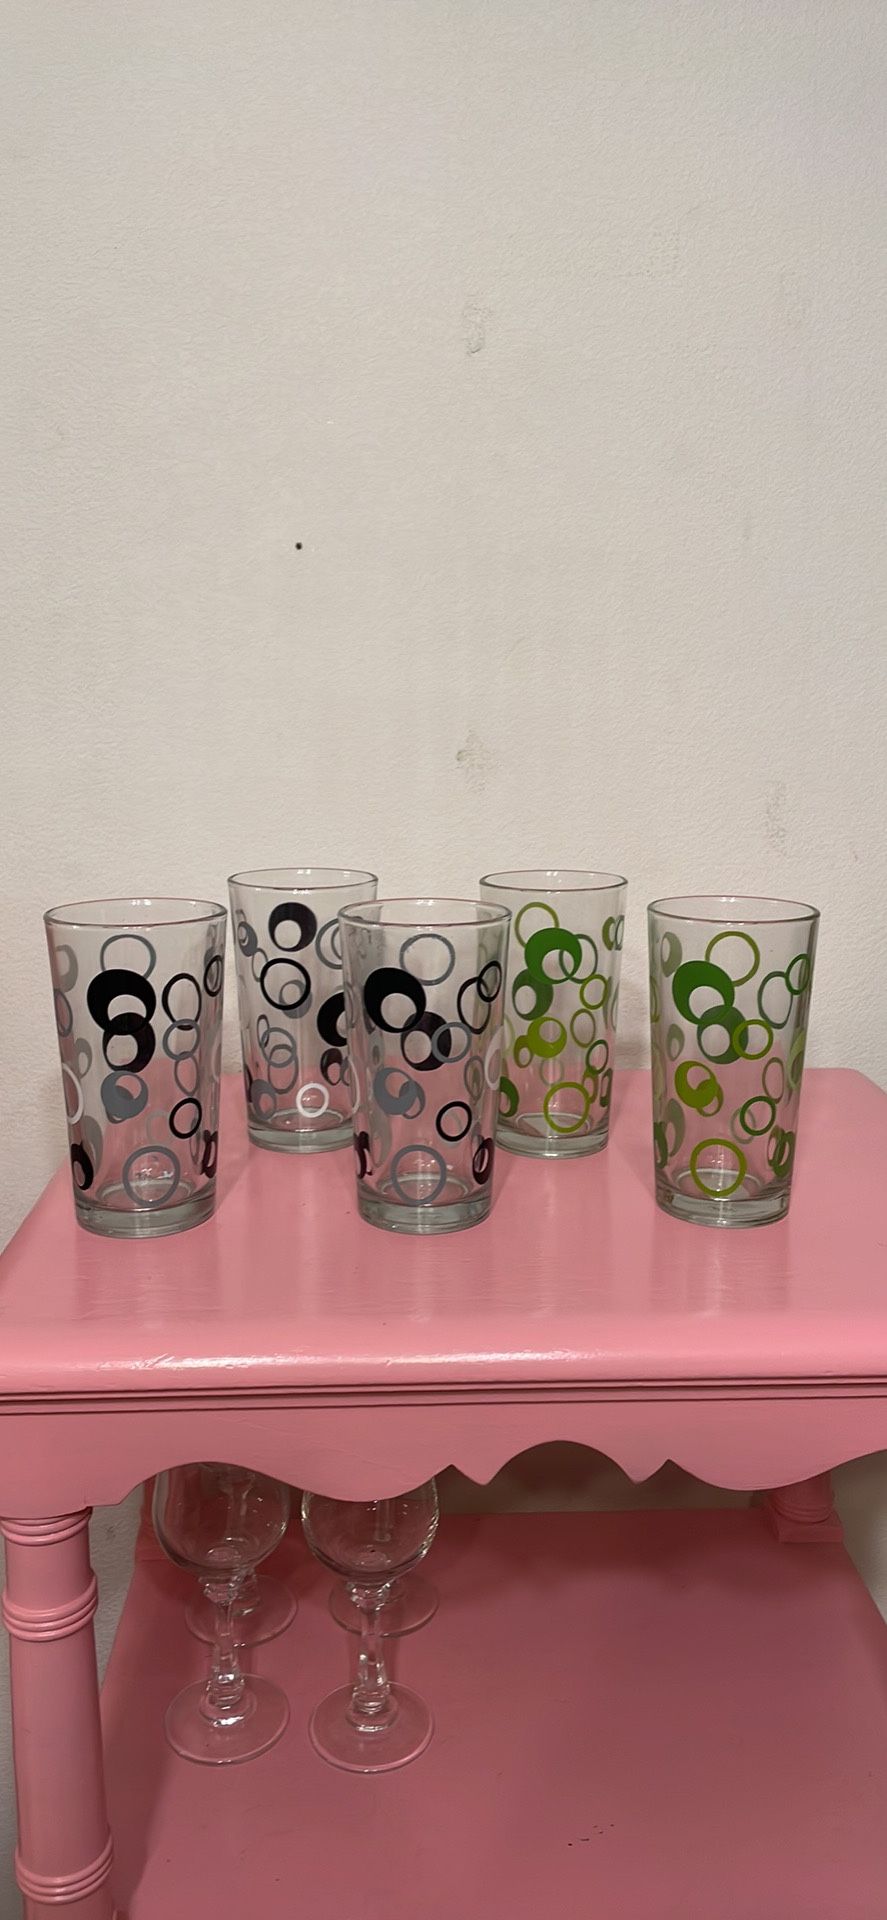 Vintage 1990s MCM Mid Century Modern 60s Style Mod Circles Glassware Drinkware Glasses Cups. Set of 5.